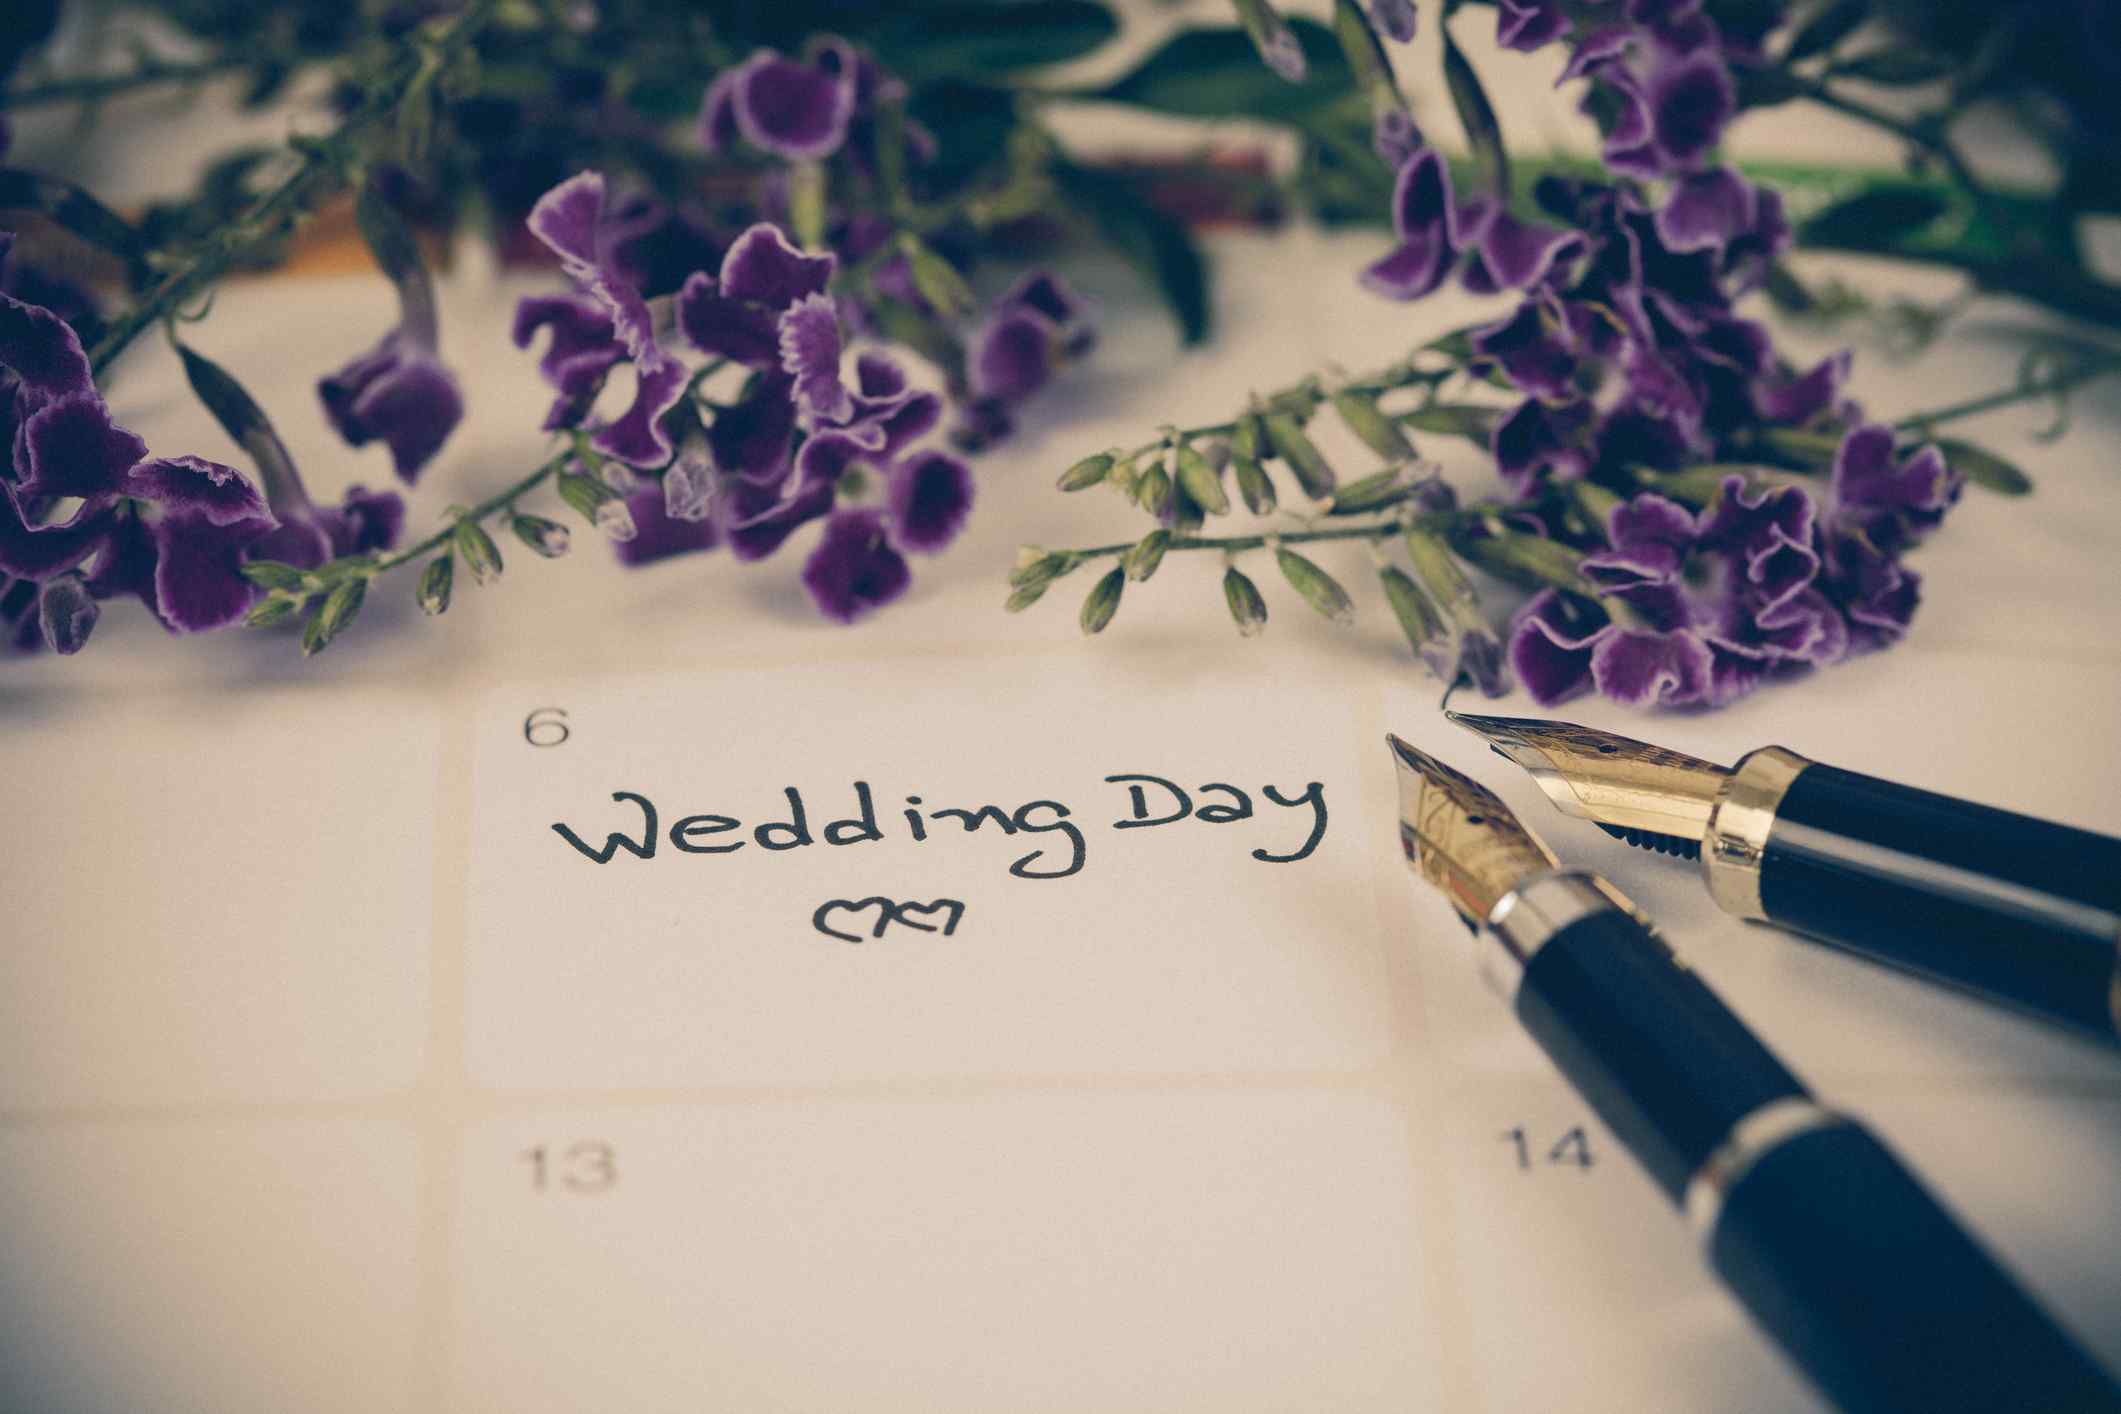 A calendar with a date labeled Wedding Day